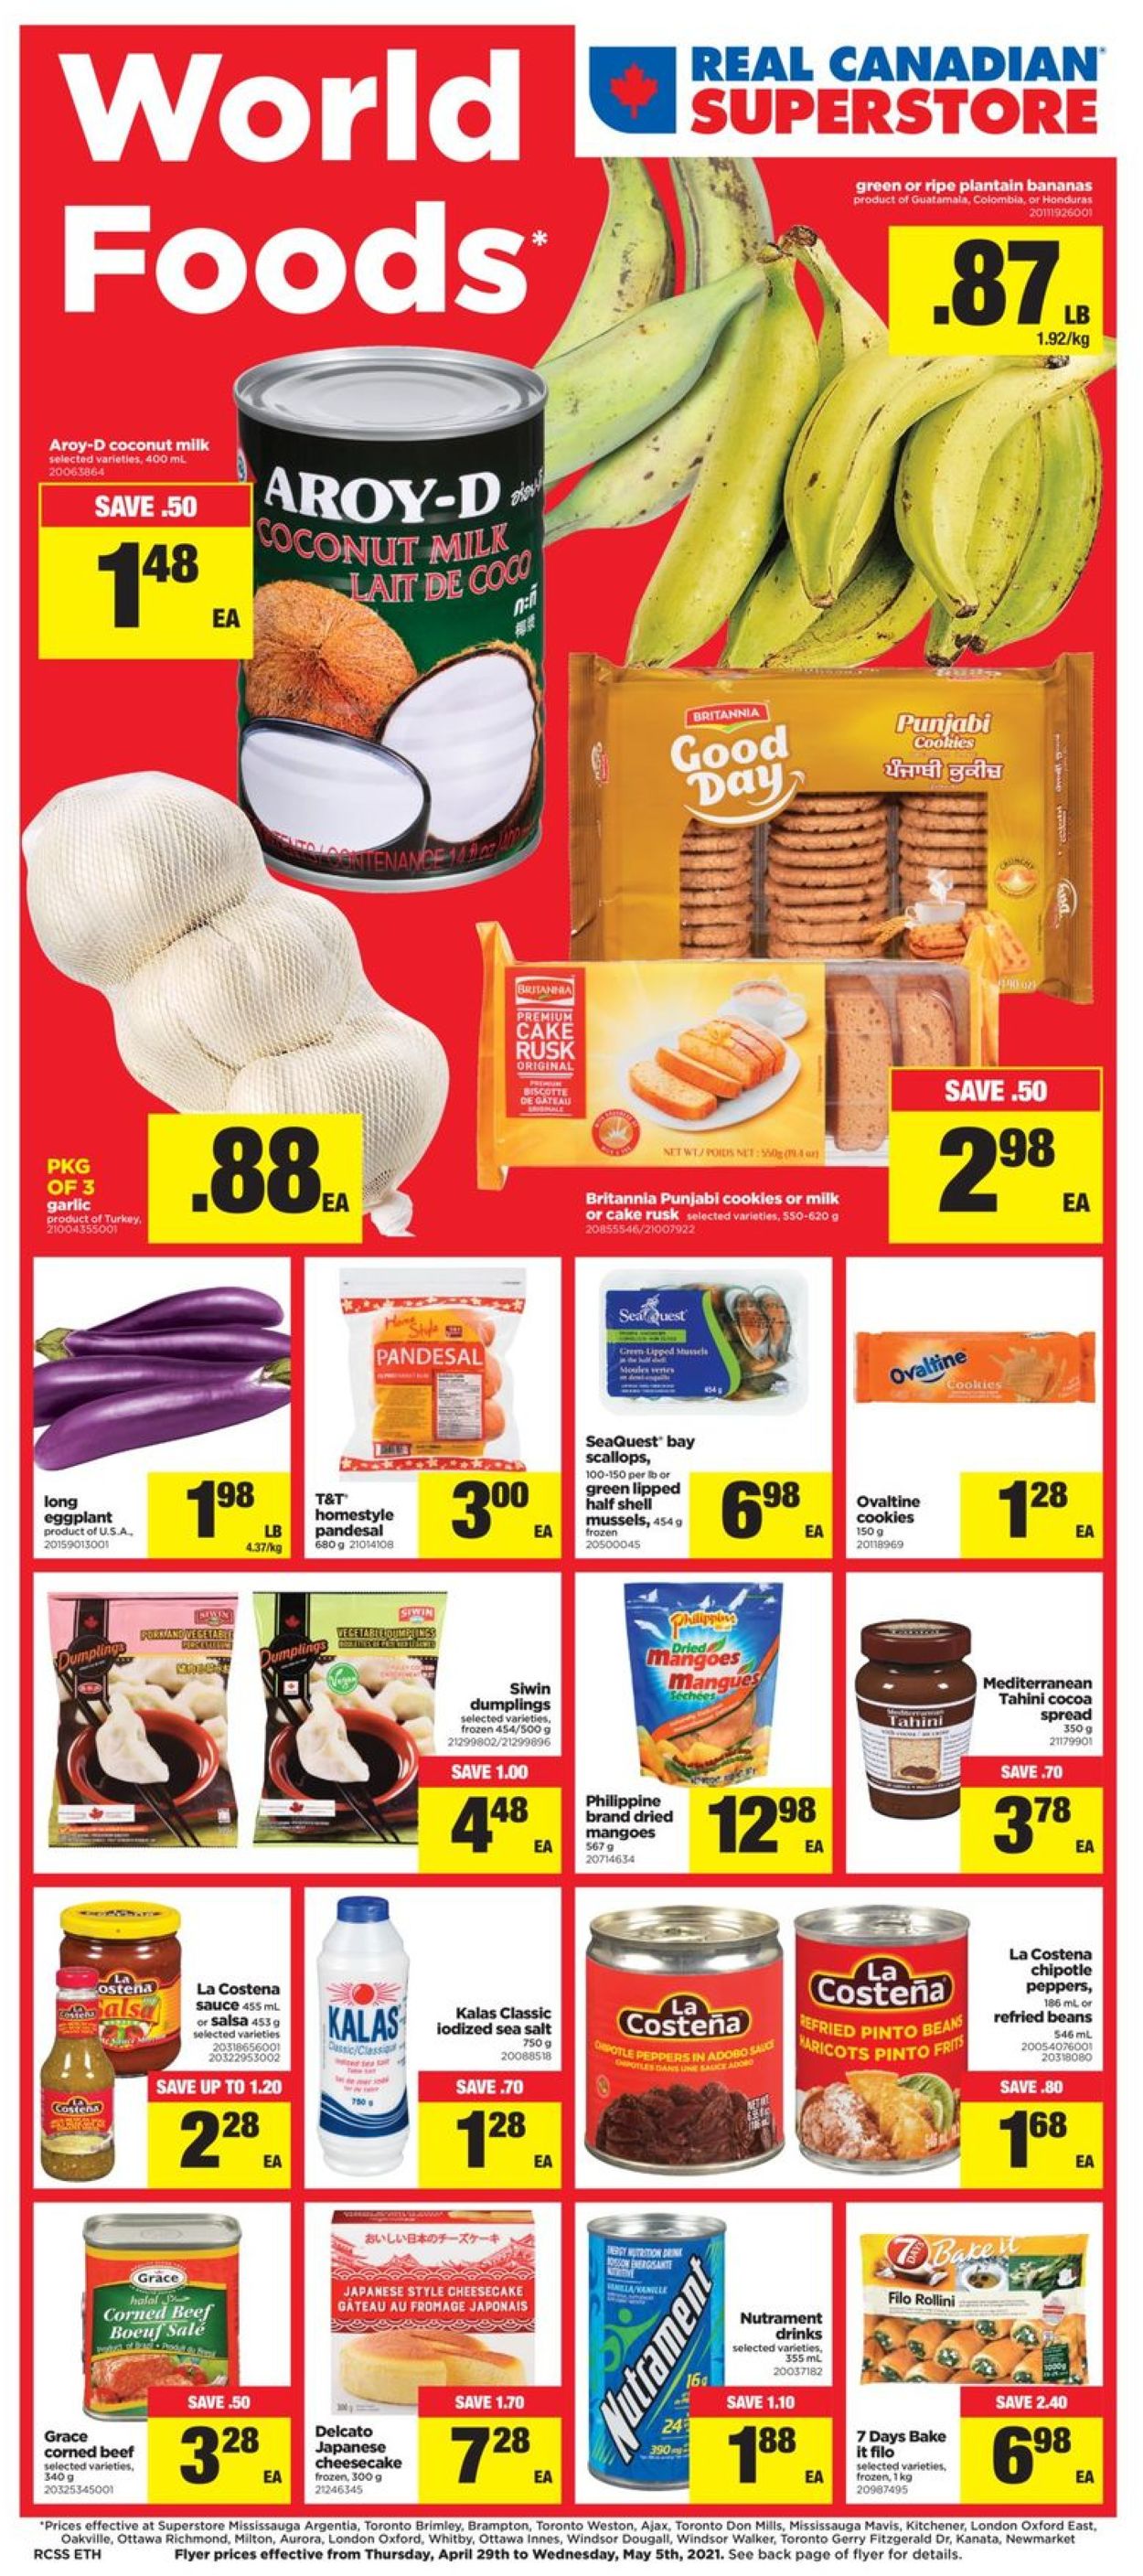 Real Canadian Superstore Flyer - 04/29-05/05/2021